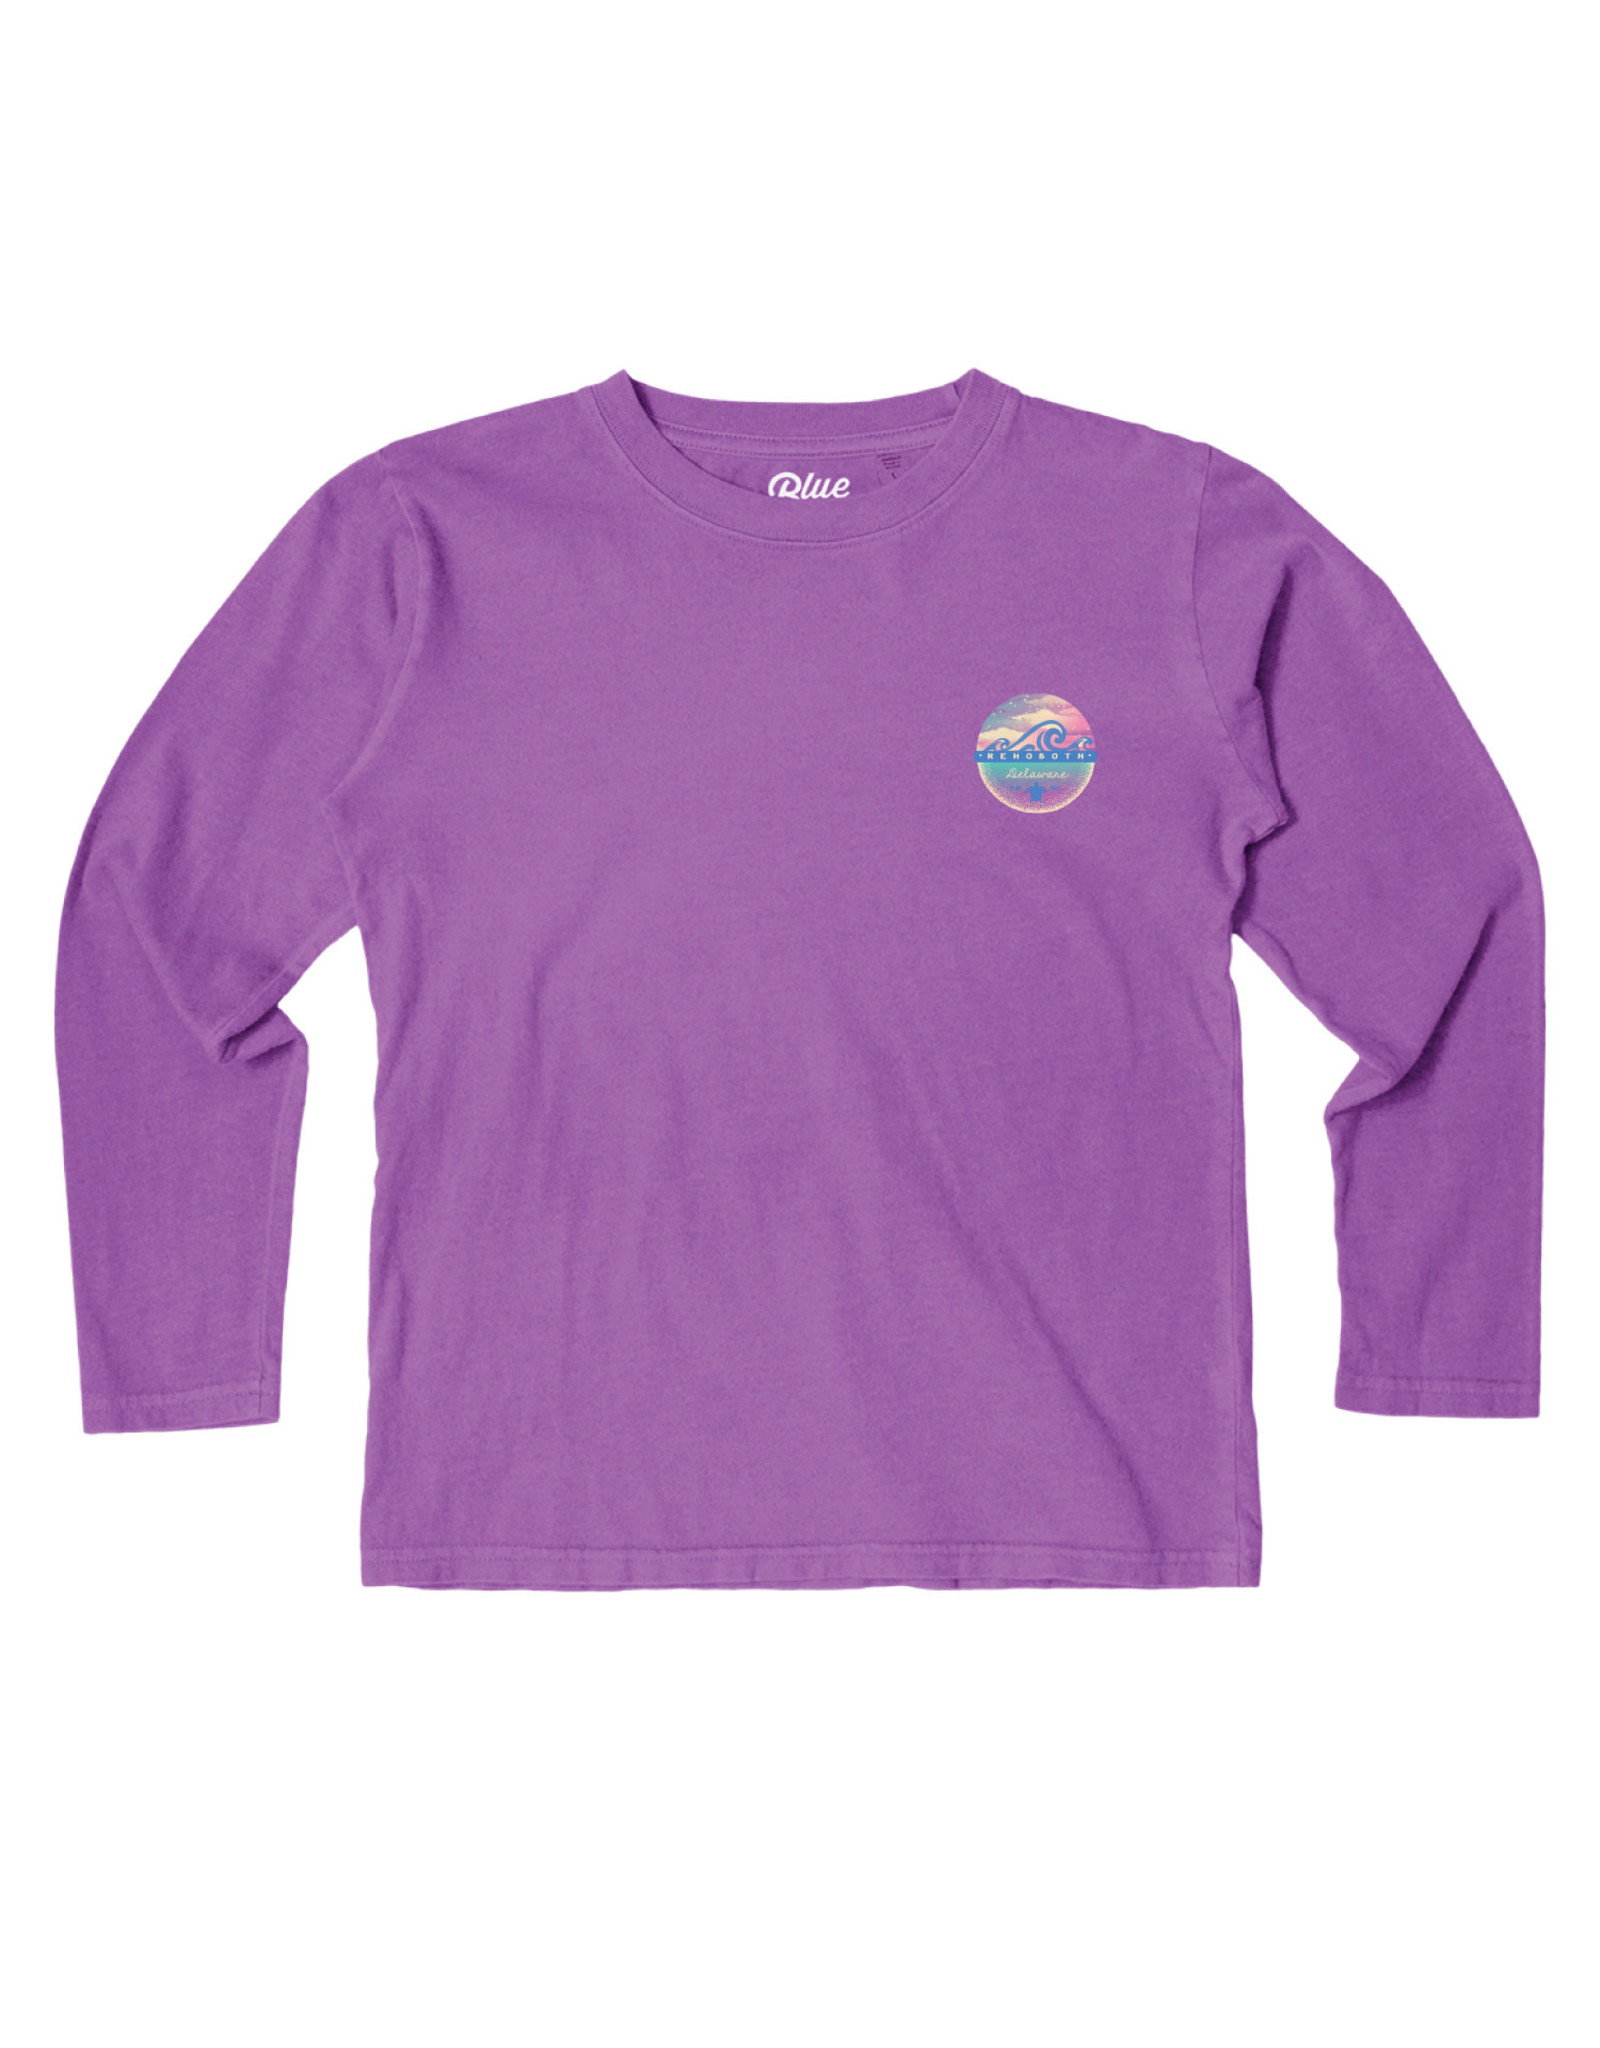 BLUE 84 MYTHIC WAVES YOUTH LS TEE